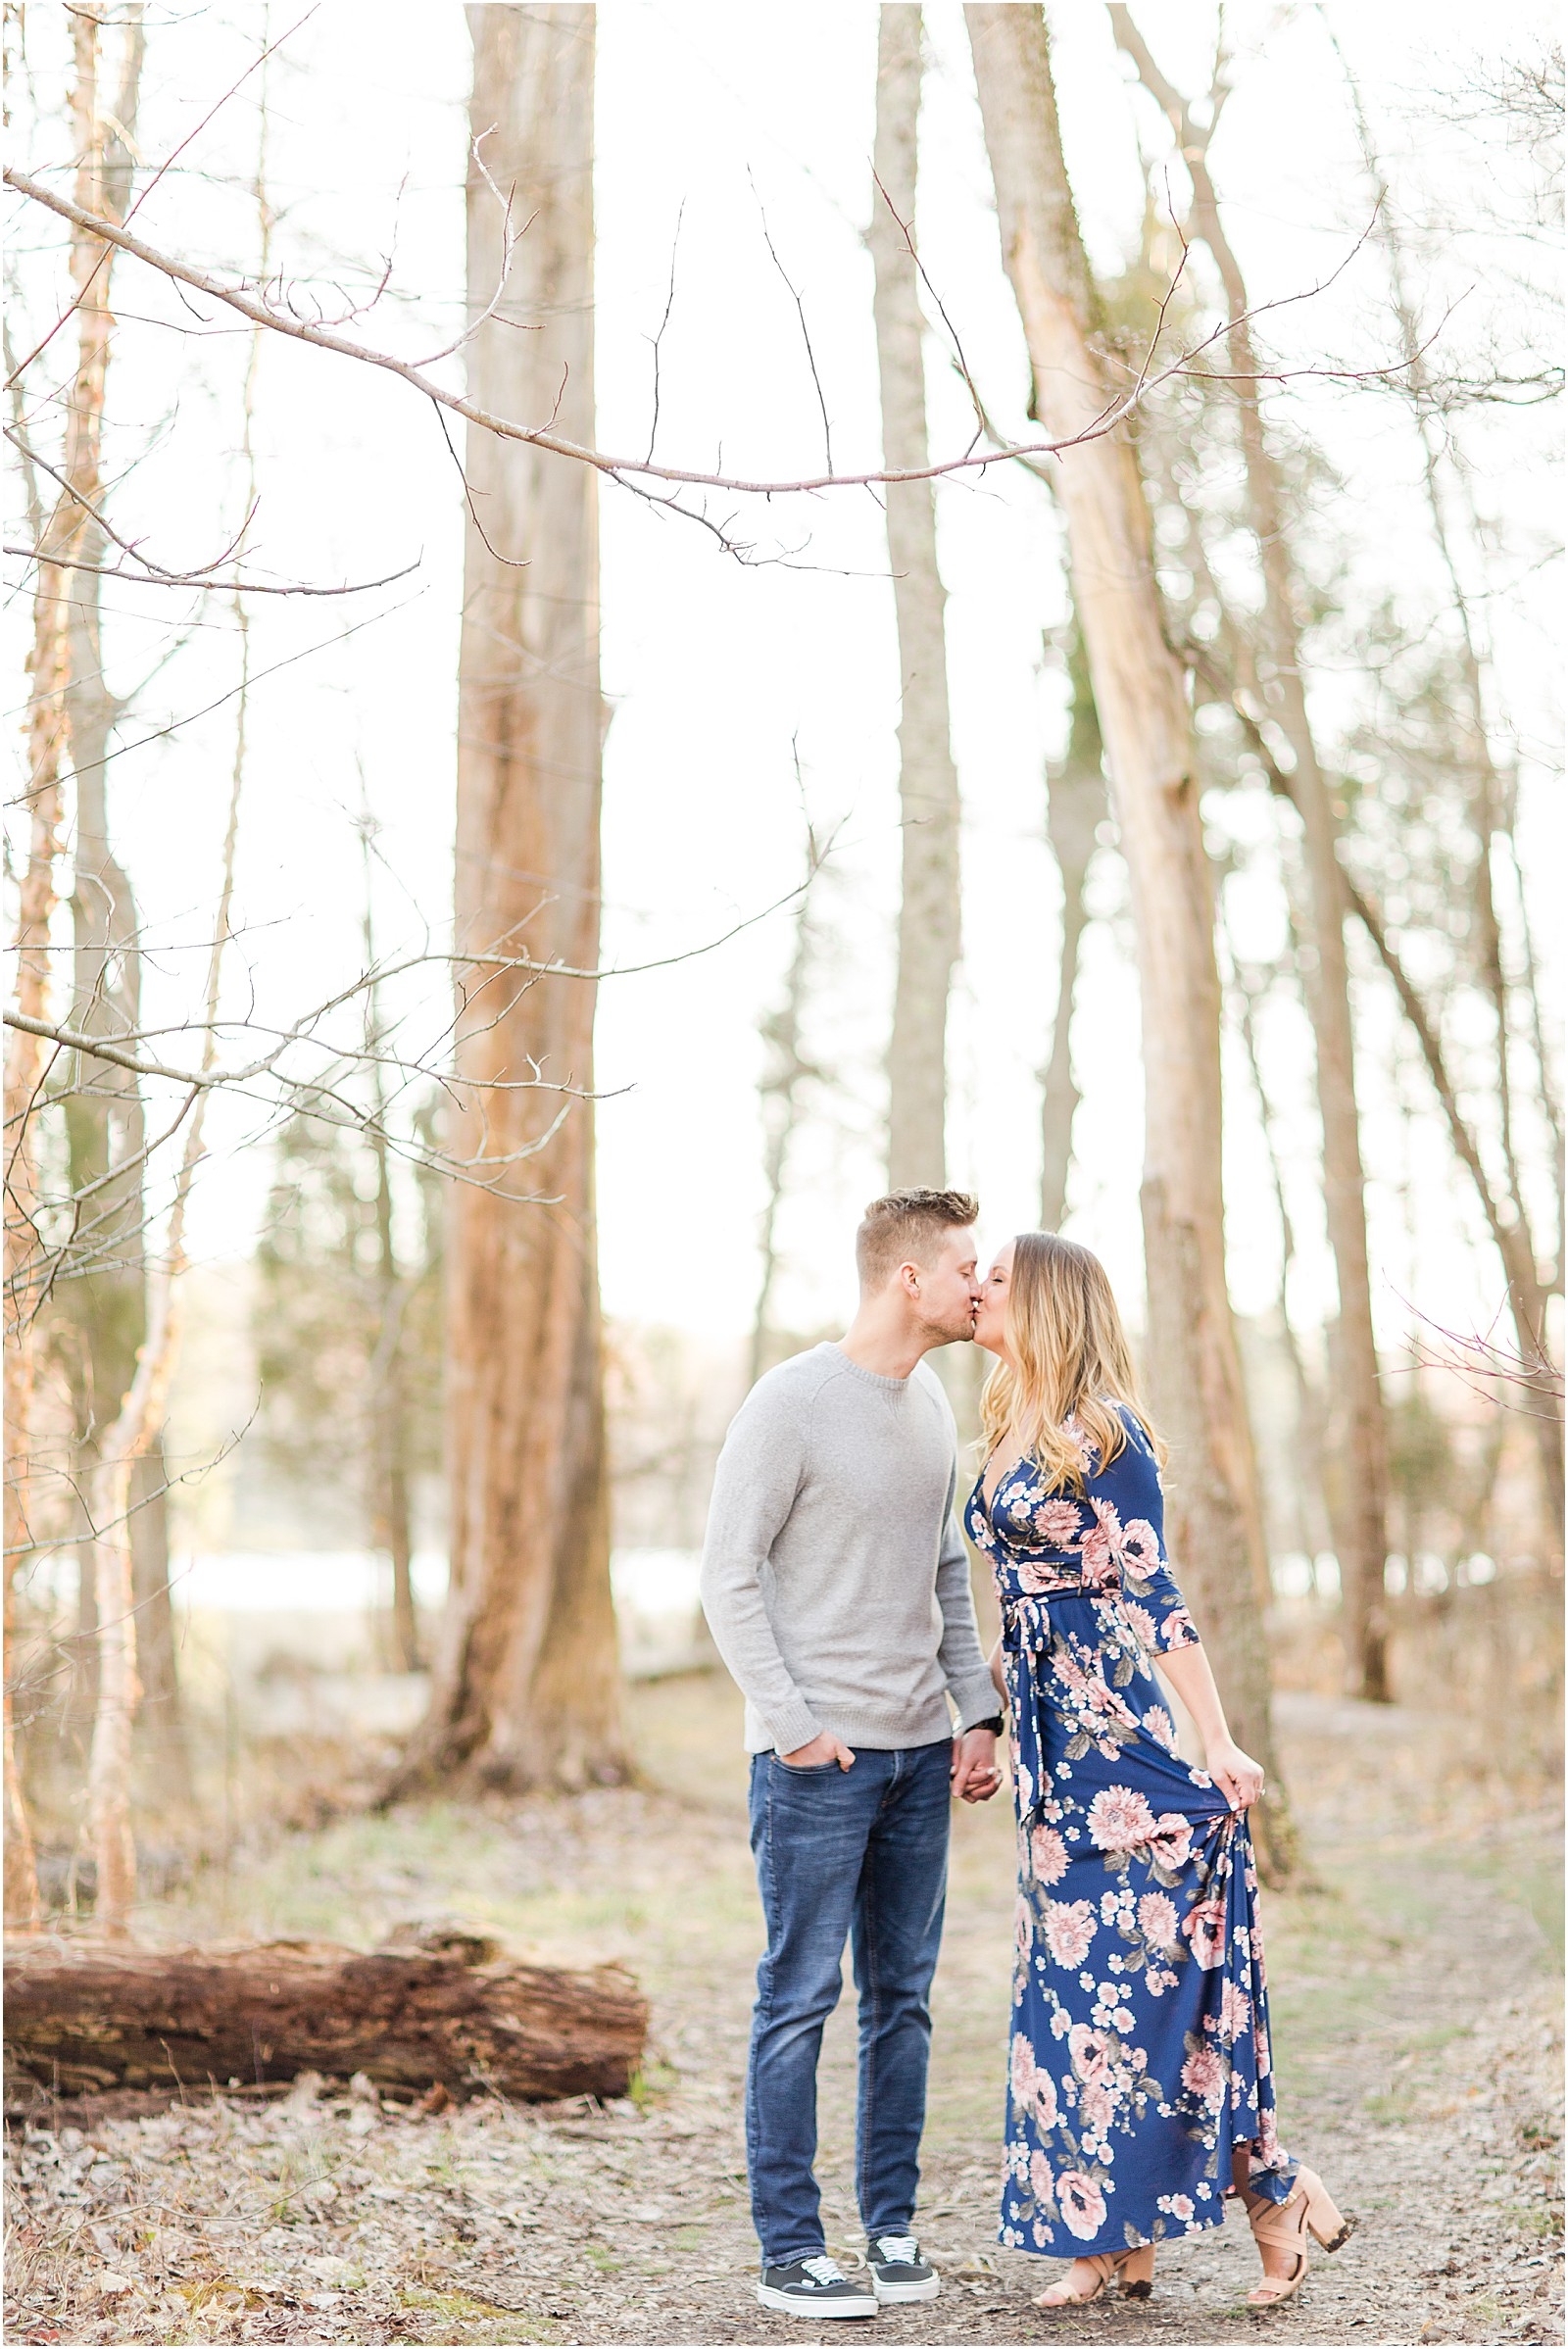 Rachel and Nick | Lincoln State Park Engagement Session 016.jpg